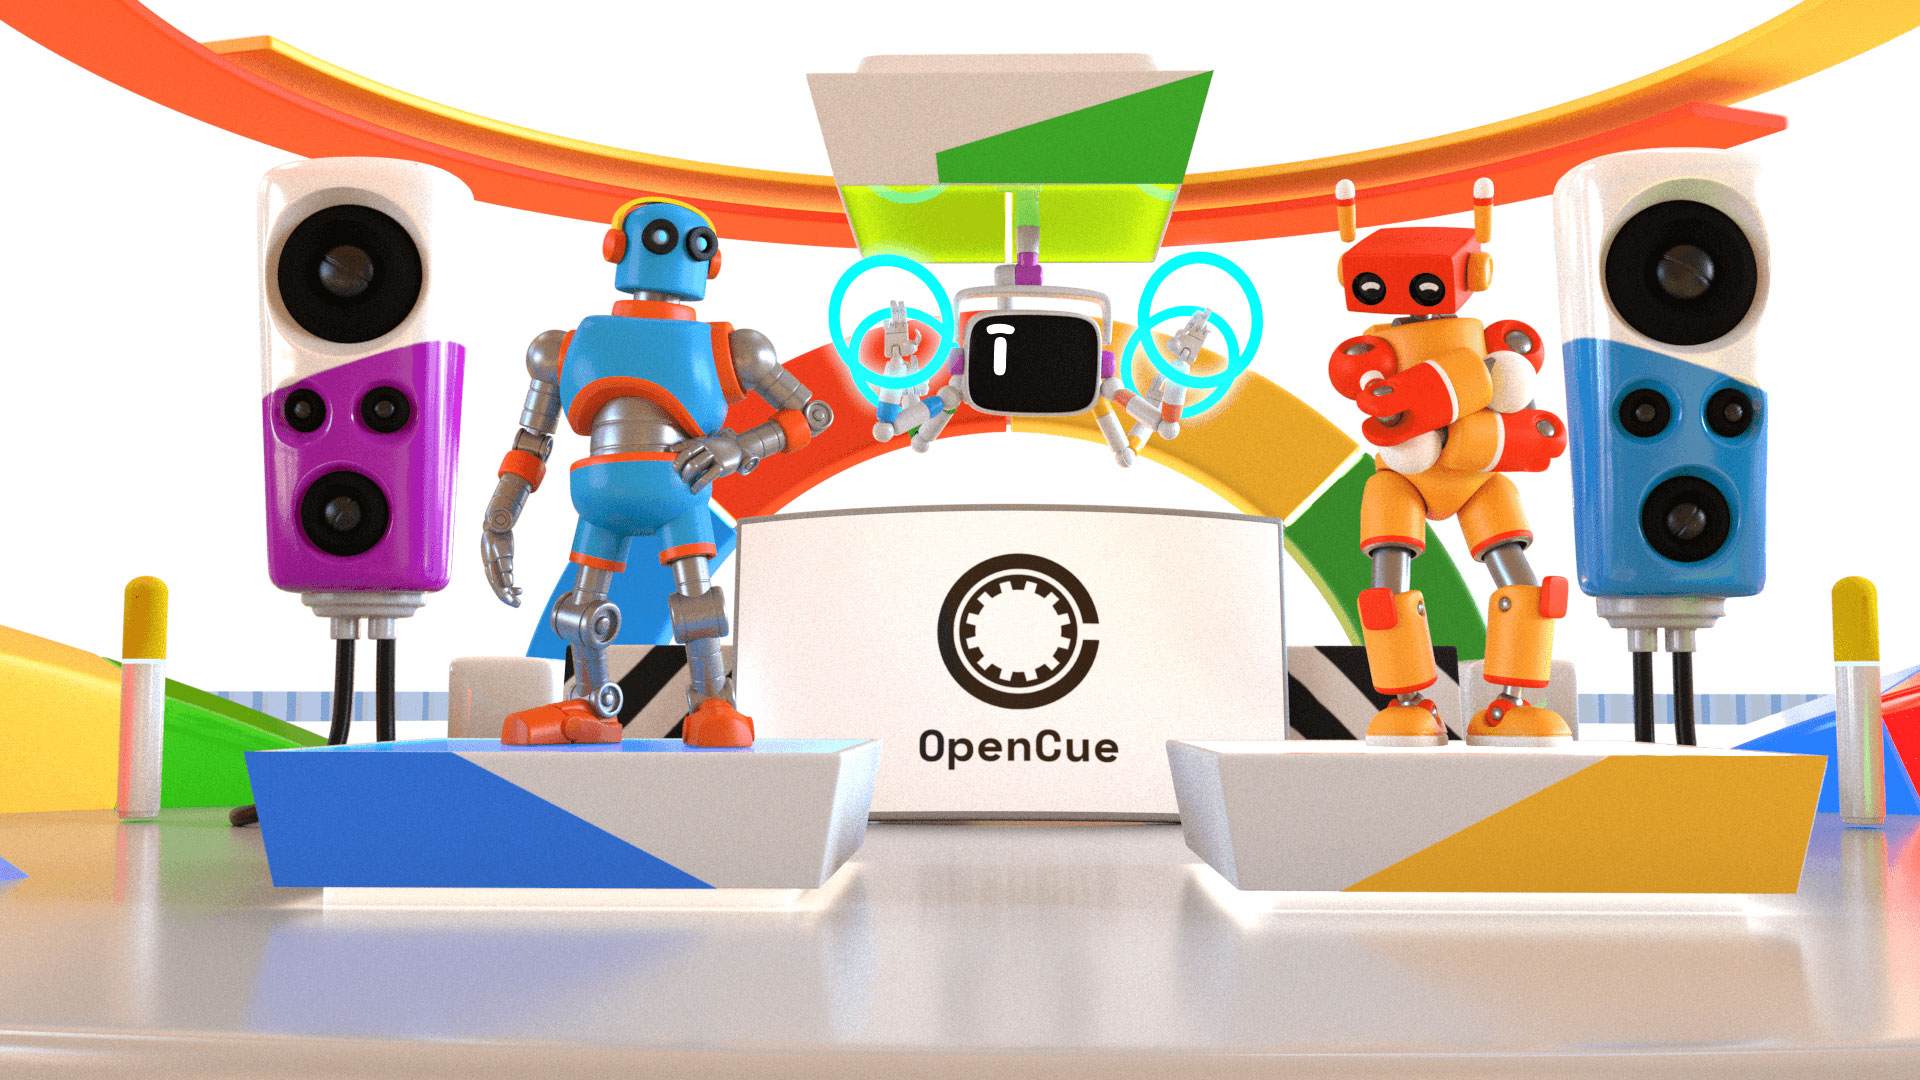 Robots posing with speakers and OpenCue logo